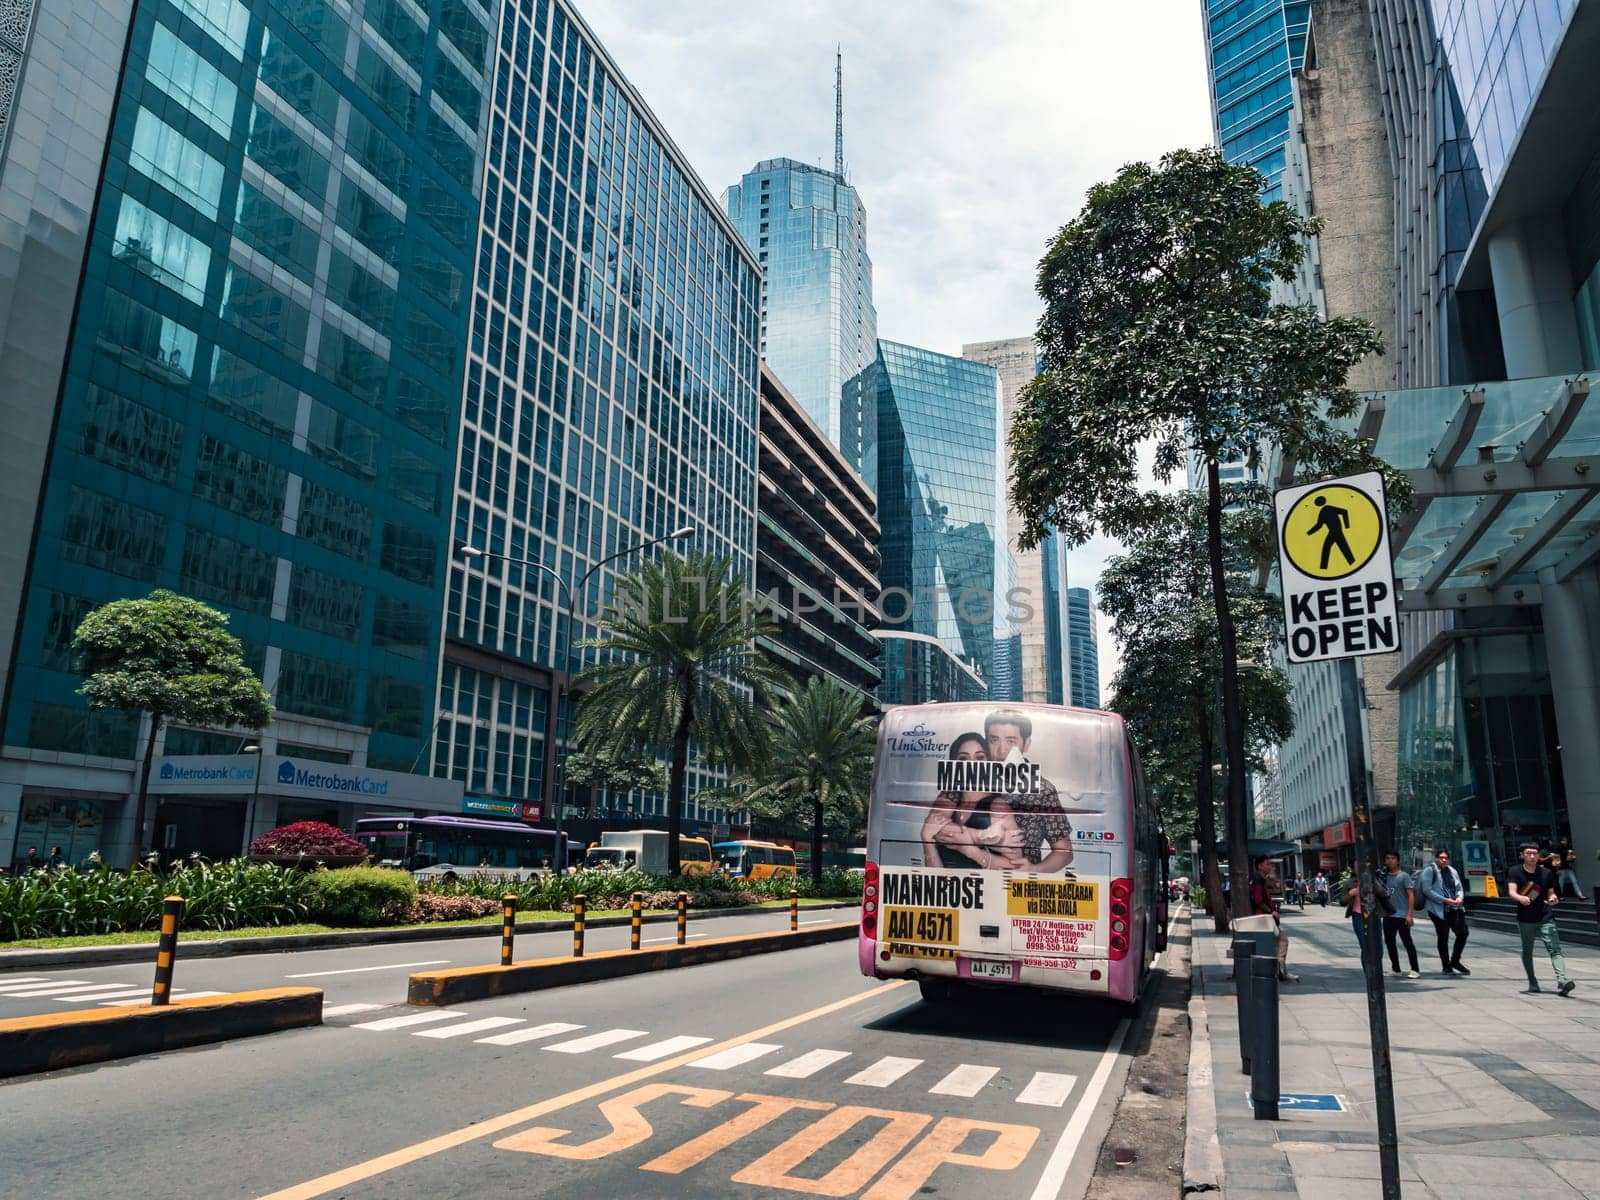 In the heart of Makati City, a bustling urban area features high-rise buildings and a public bus on a busy street promoting an event.